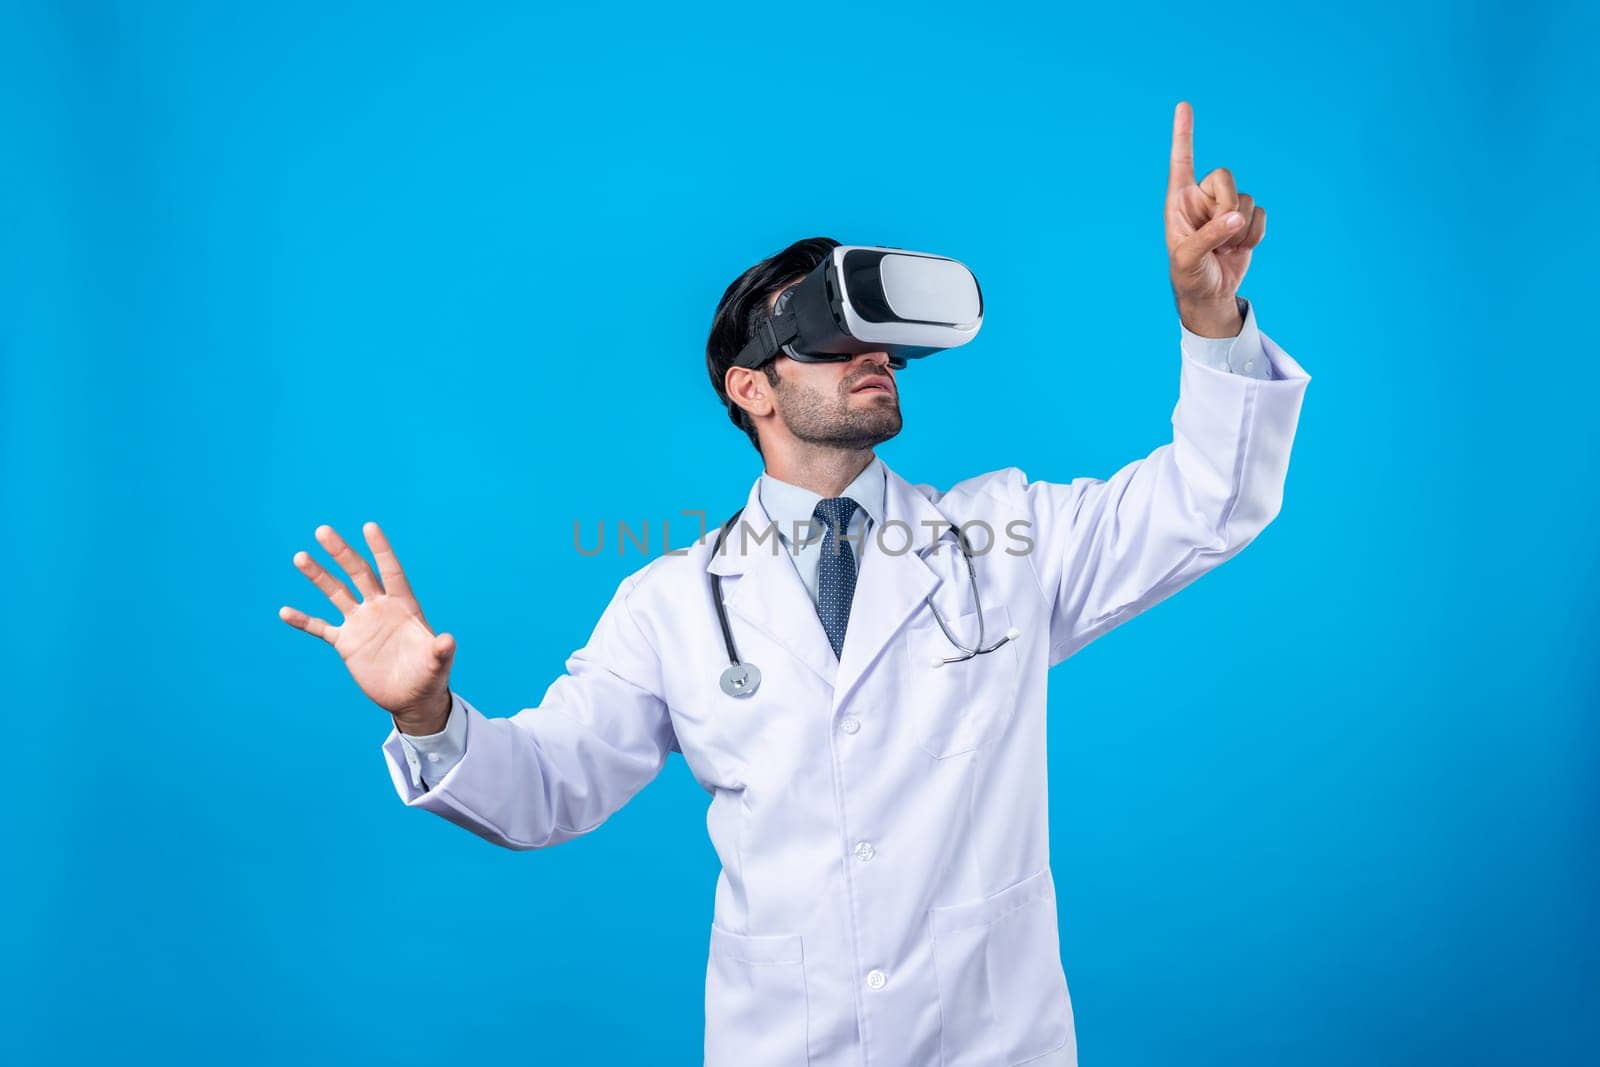 Caucasian doctor pointing and choosing medical data while standing. Handsome doctor wearing lab coat and VR goggles to connect metaverse or visual reality program. Technology innovation. Deviation.